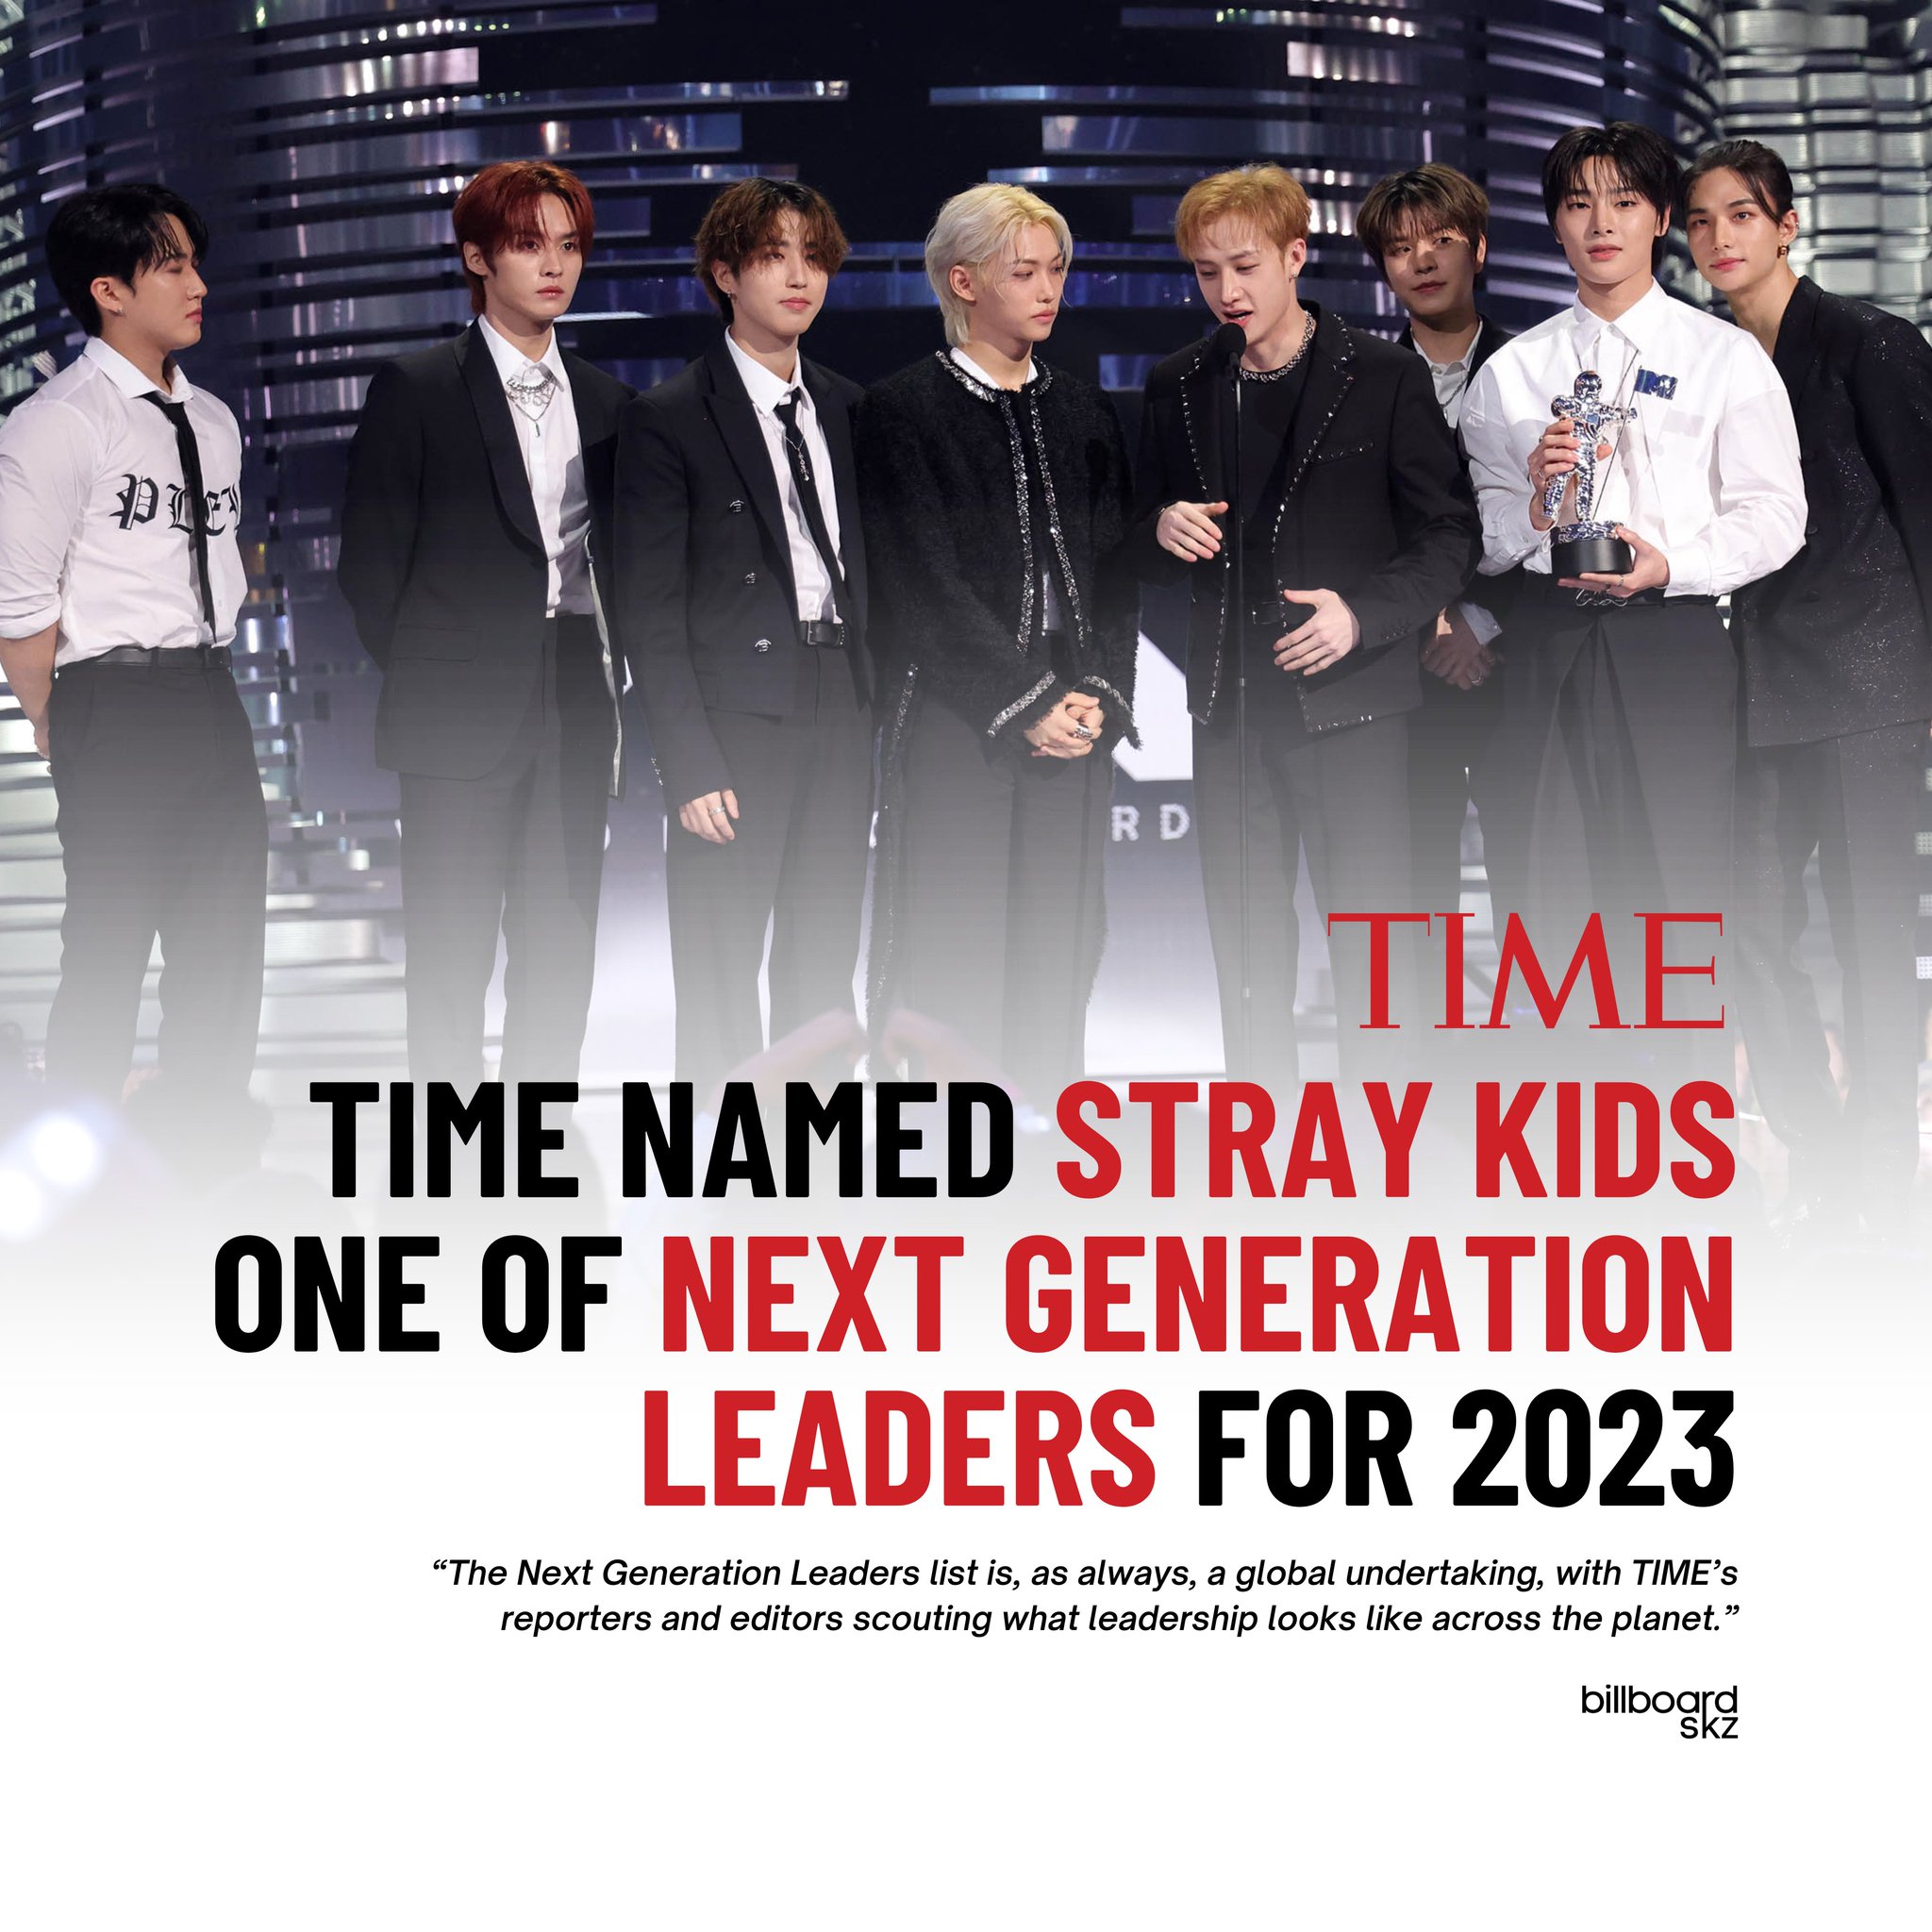 Stray Kids makes Time's Next-Gen Leaders list - The Korea Times